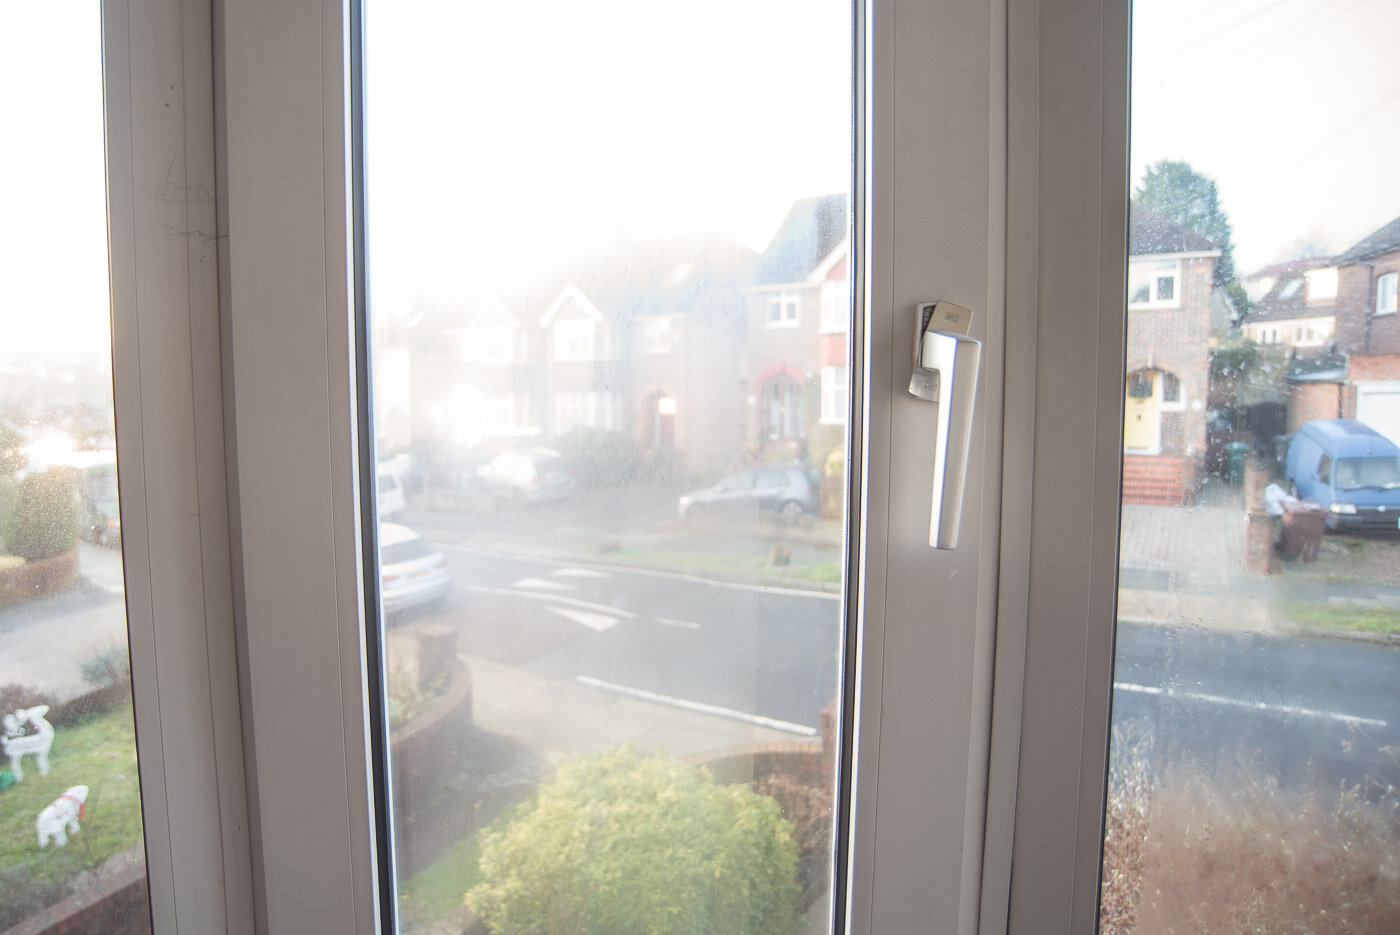 The ‘FROSTED window EFFECT’ in our UPVC bay window